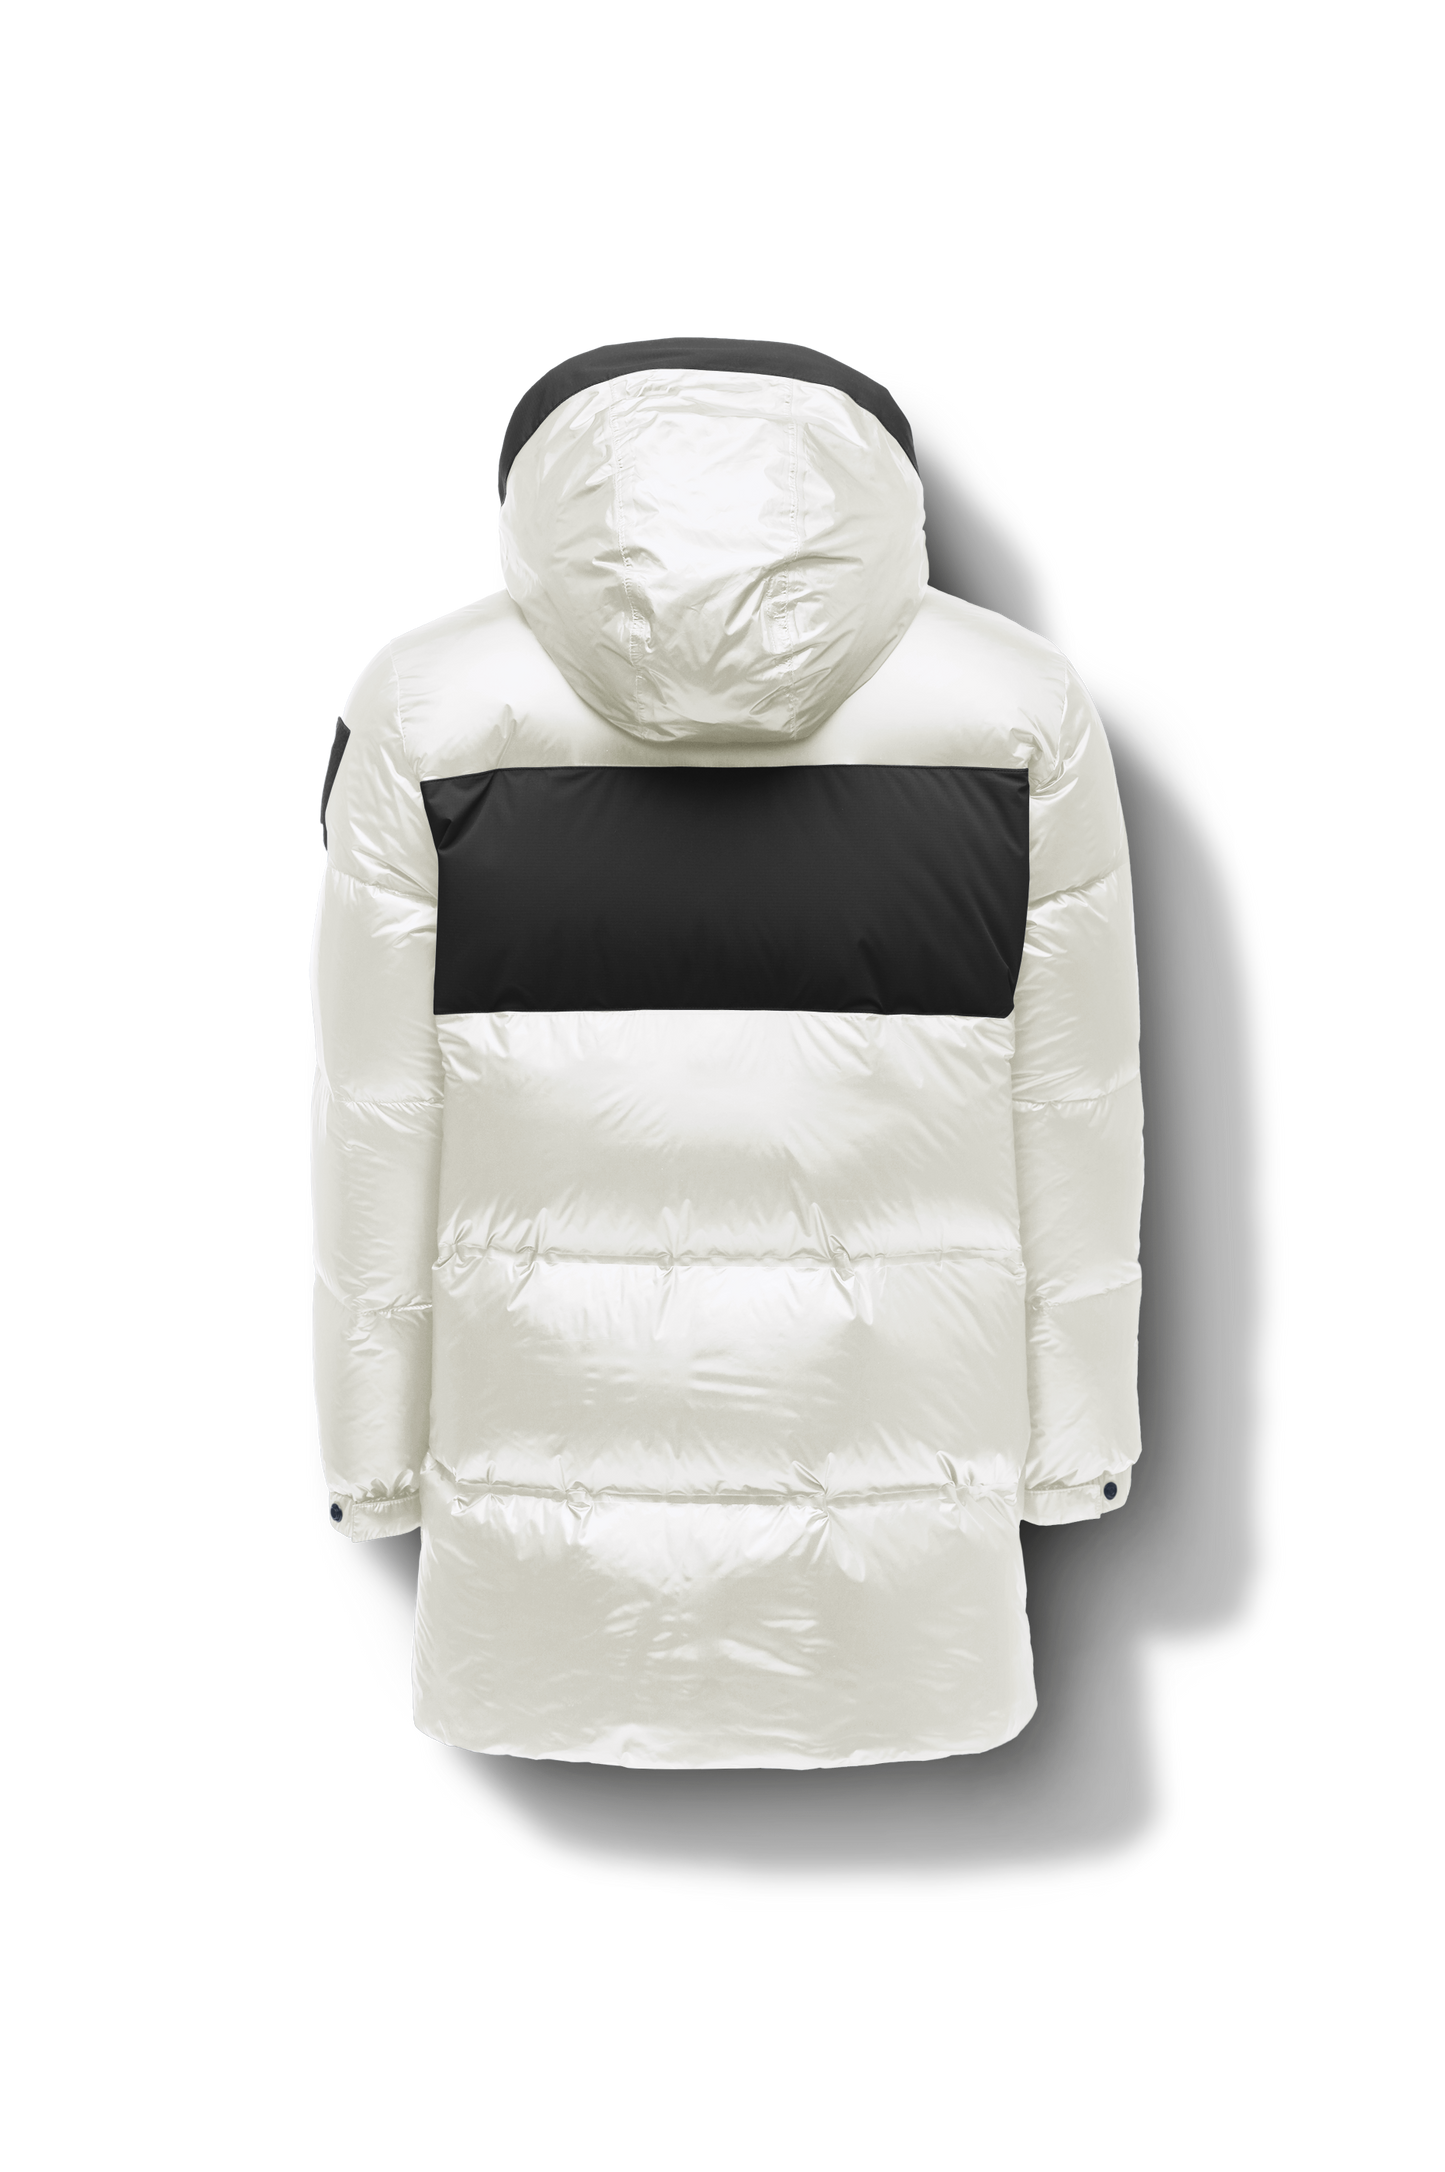 Neelix Men's Long Puffer Jacket in thigh length, premium cire technical nylon taffeta and stretch ripstop fabrication, Premium Canadian origin White Duck Down insulation, non-removable down-filled hood, two-way centre-front zipper, pit zipper vents, hidden chest zipper pockets, fleece-lined magnetic closure waist pockets, in Chalk